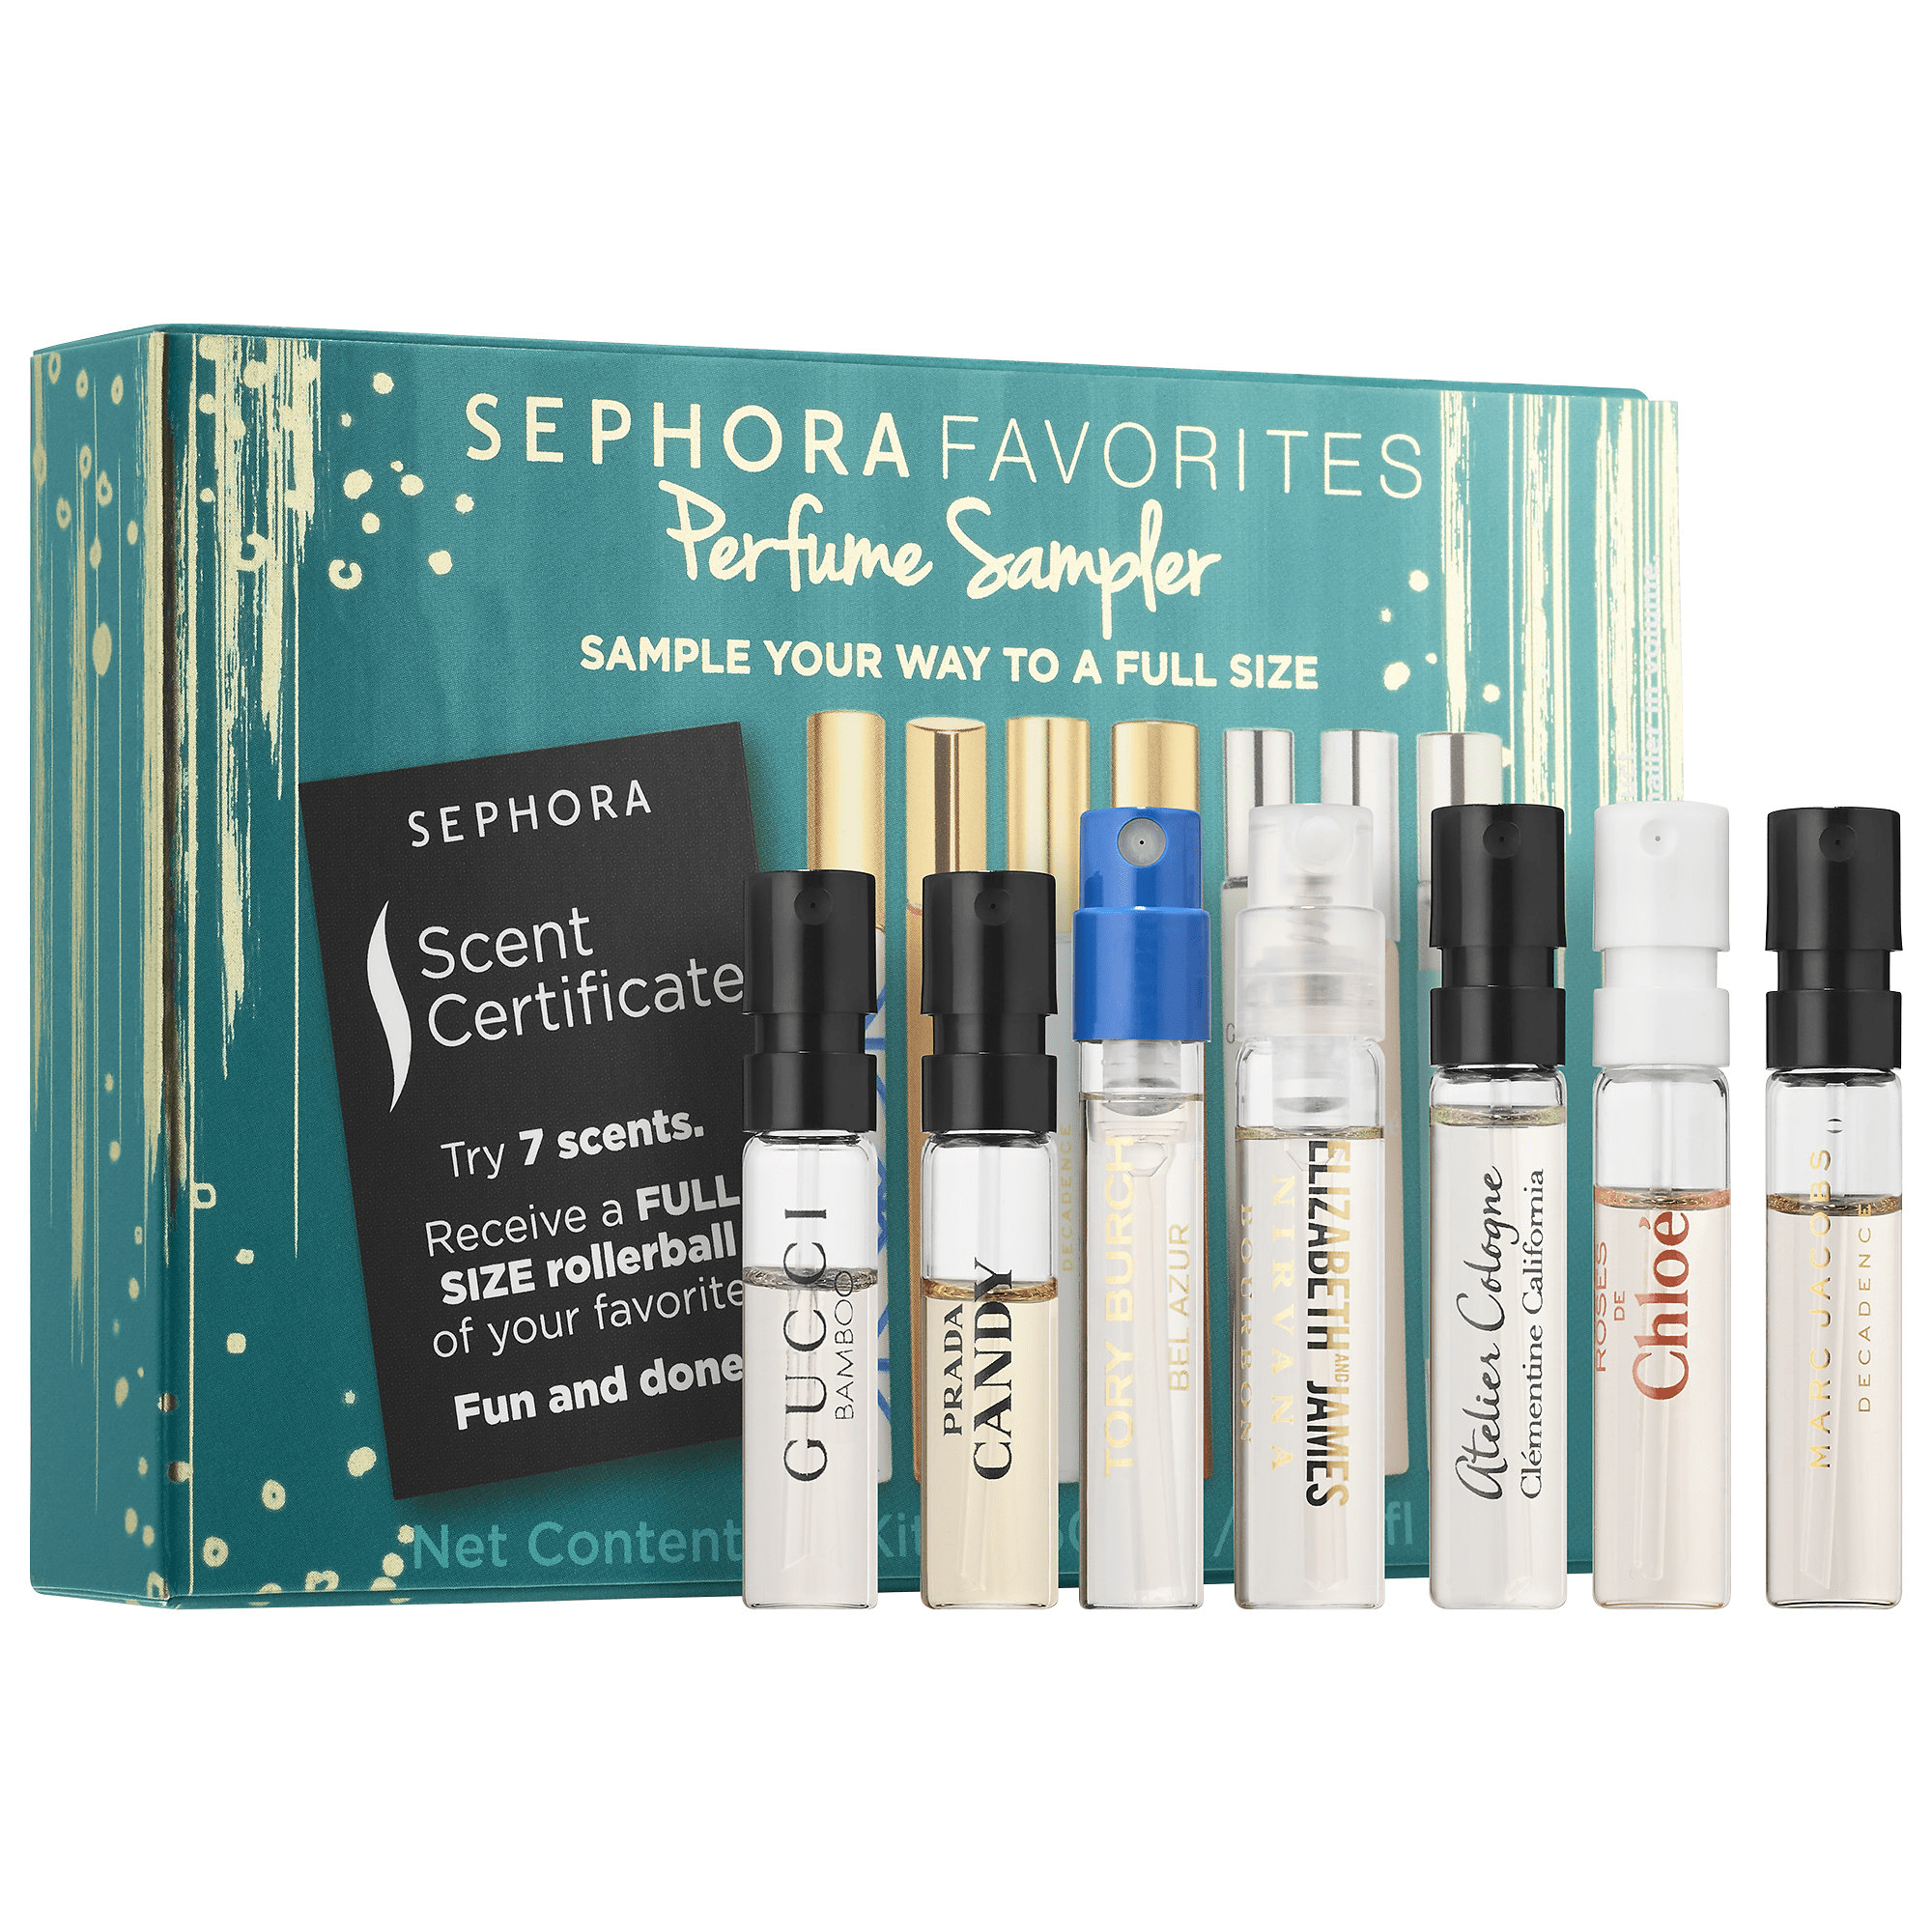 Two New Sephora Favorites Kits Available Now! - Hello Subscription